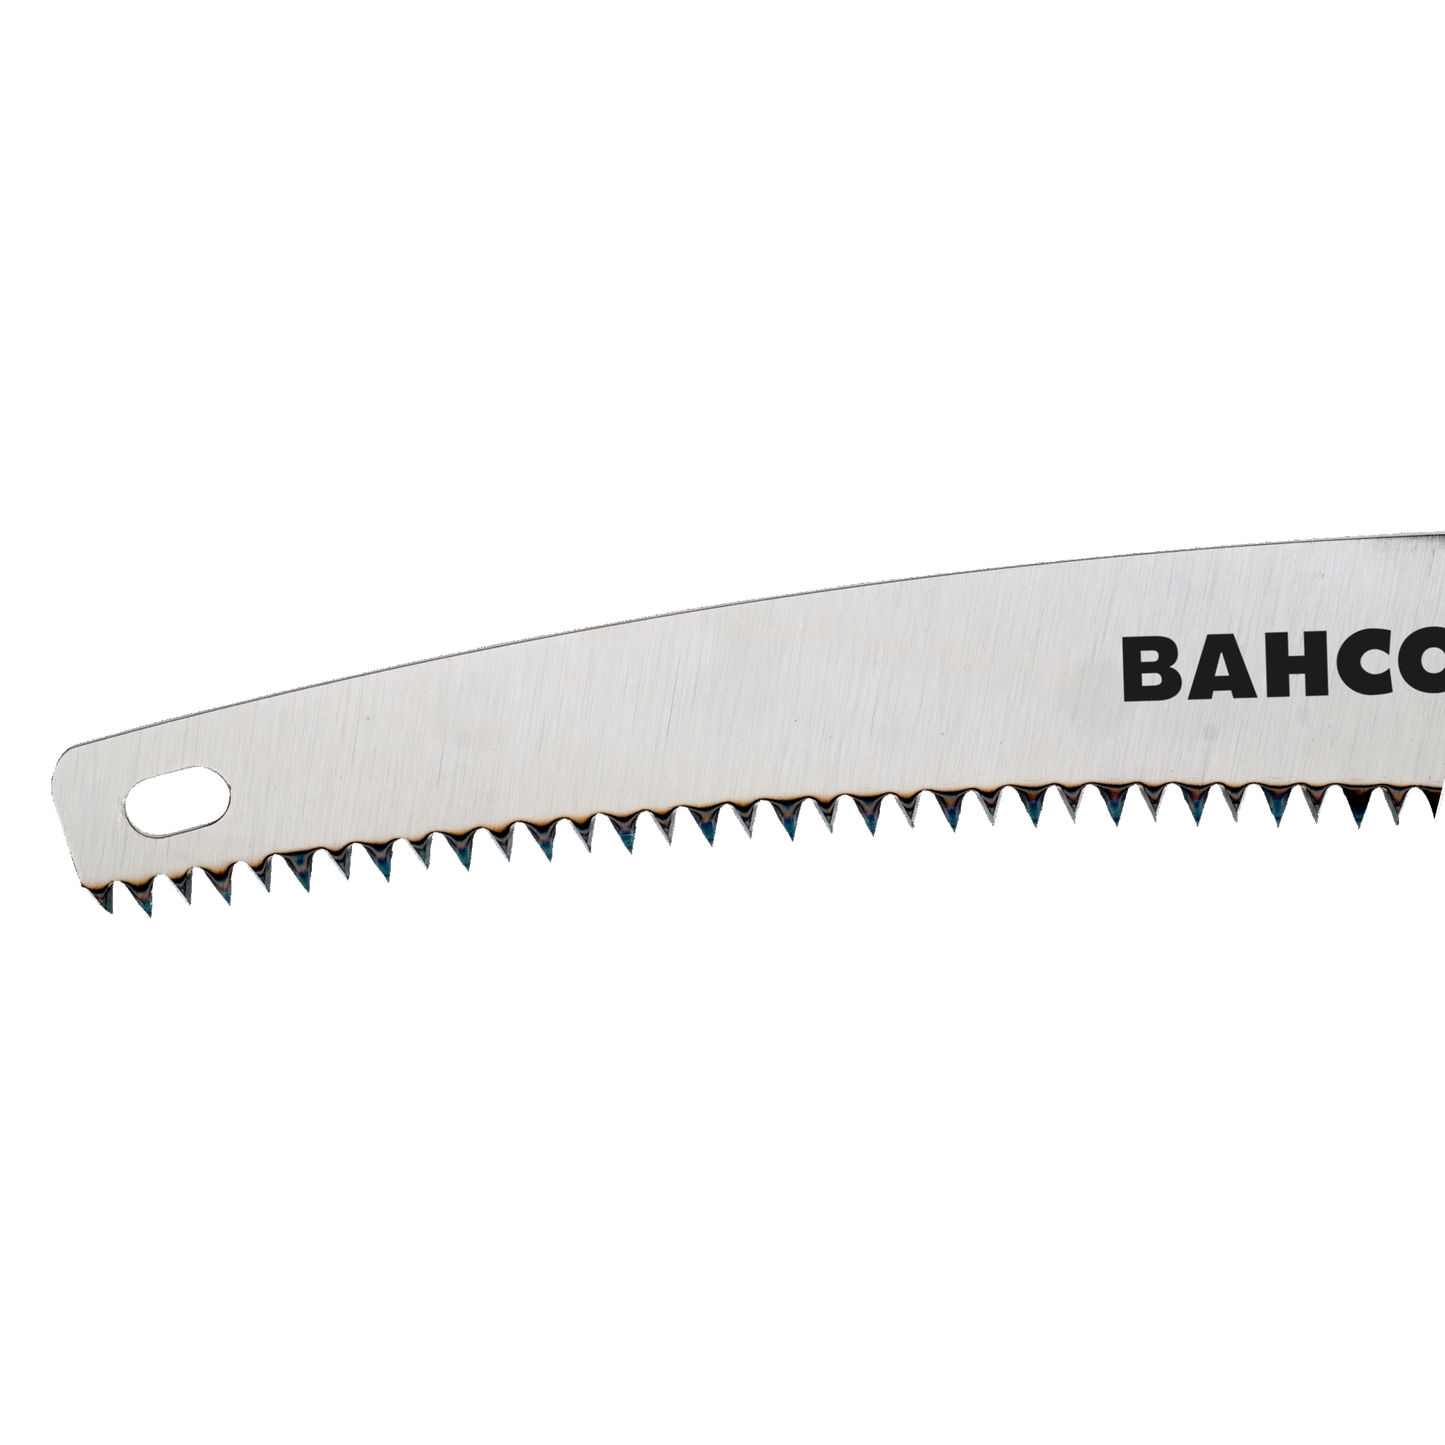 Bahco 6 TPI Hardpoint Toothed Pole Pruning Saw with Plastic Handle 360mm